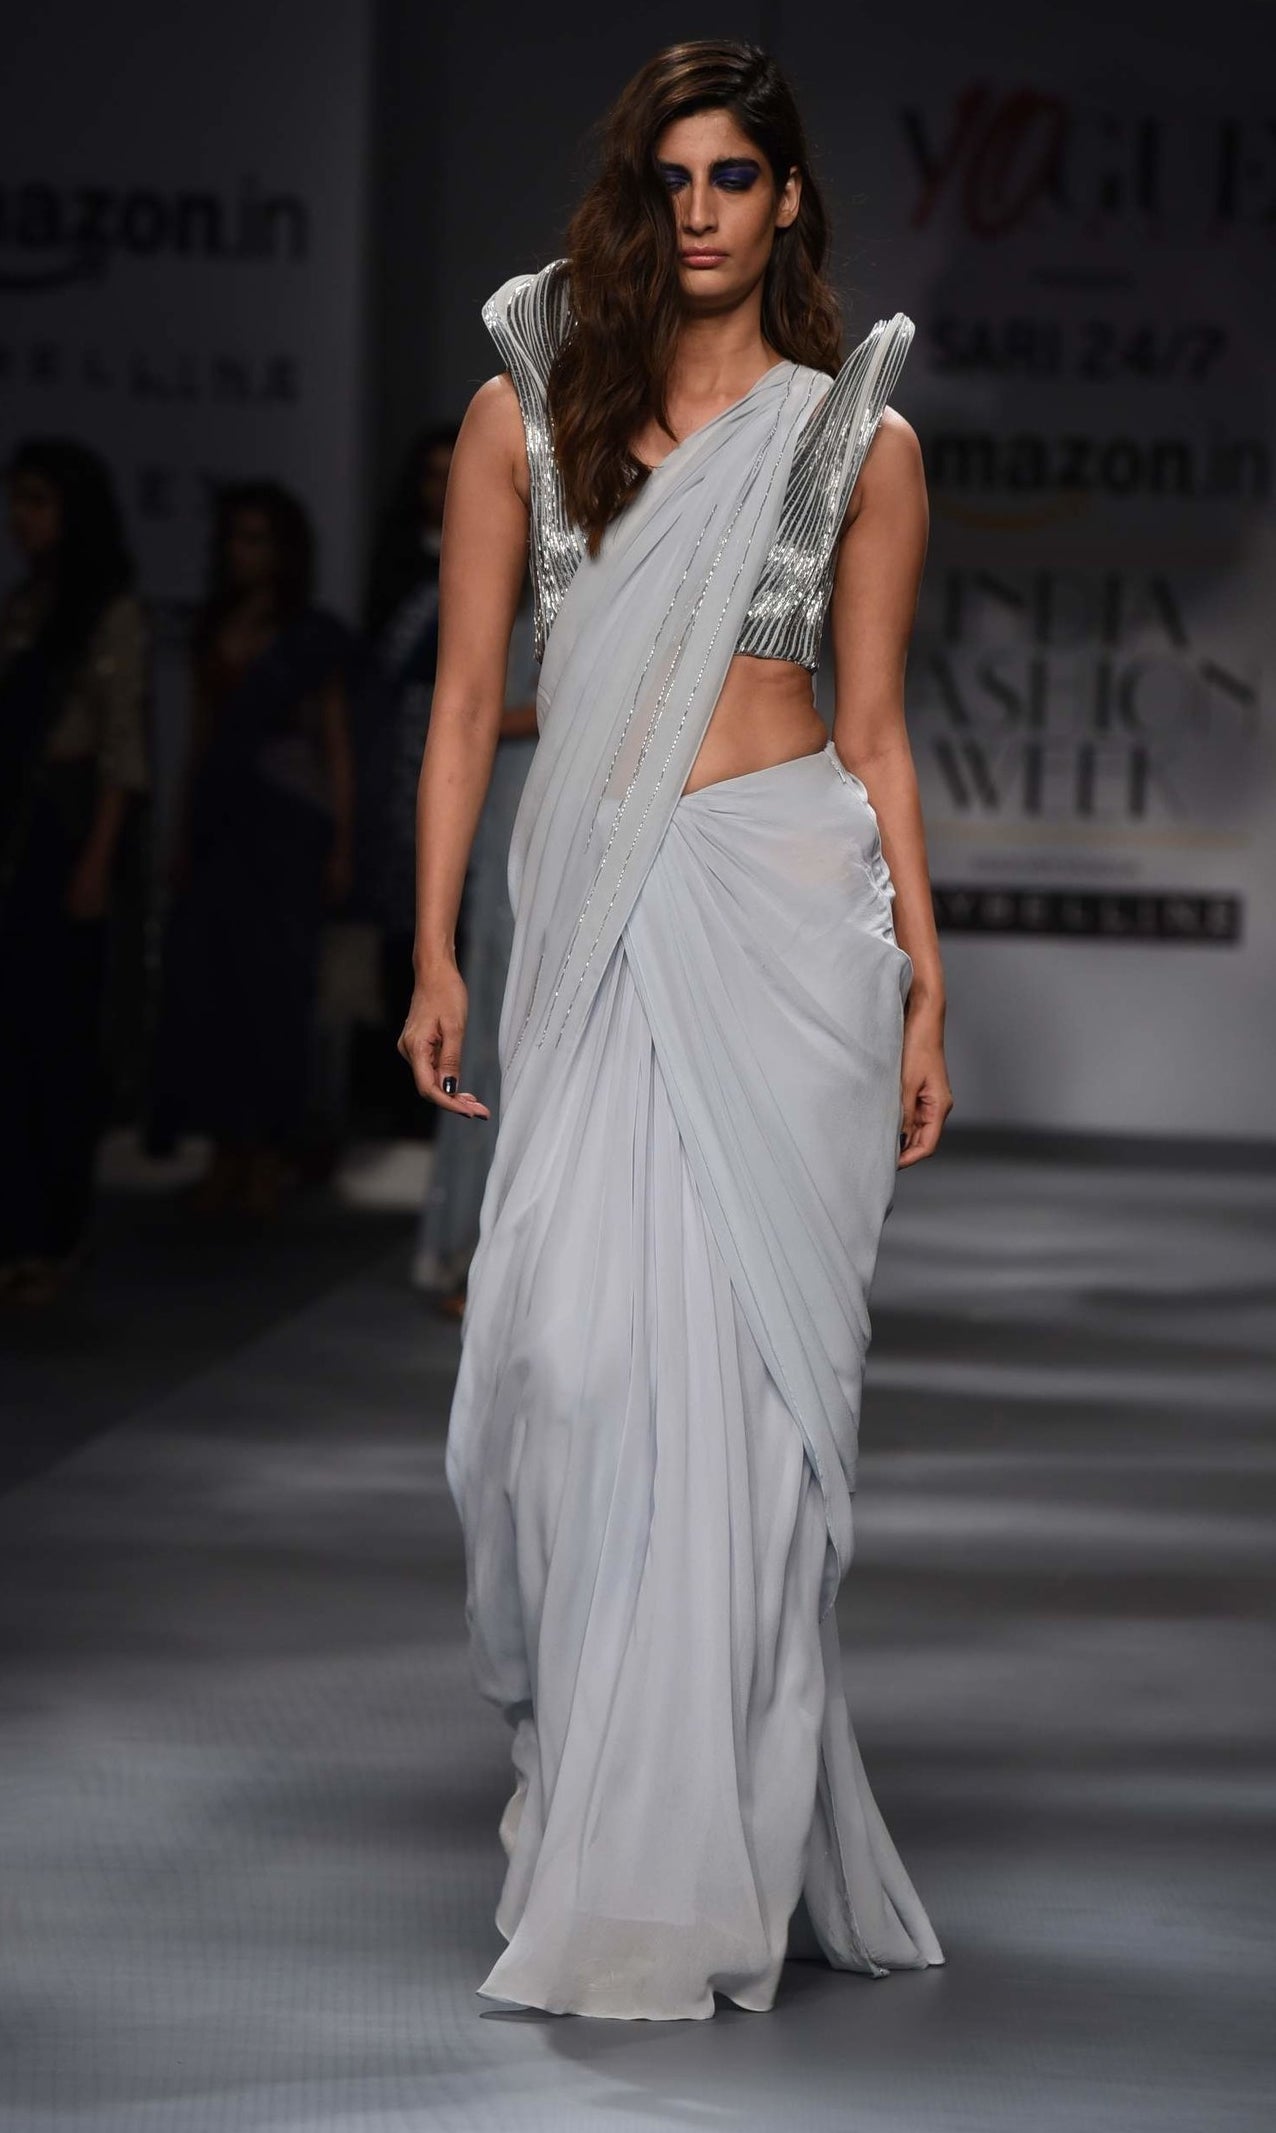 The Saree Series: 4 Ways of Reinventing a Saree for an everyday